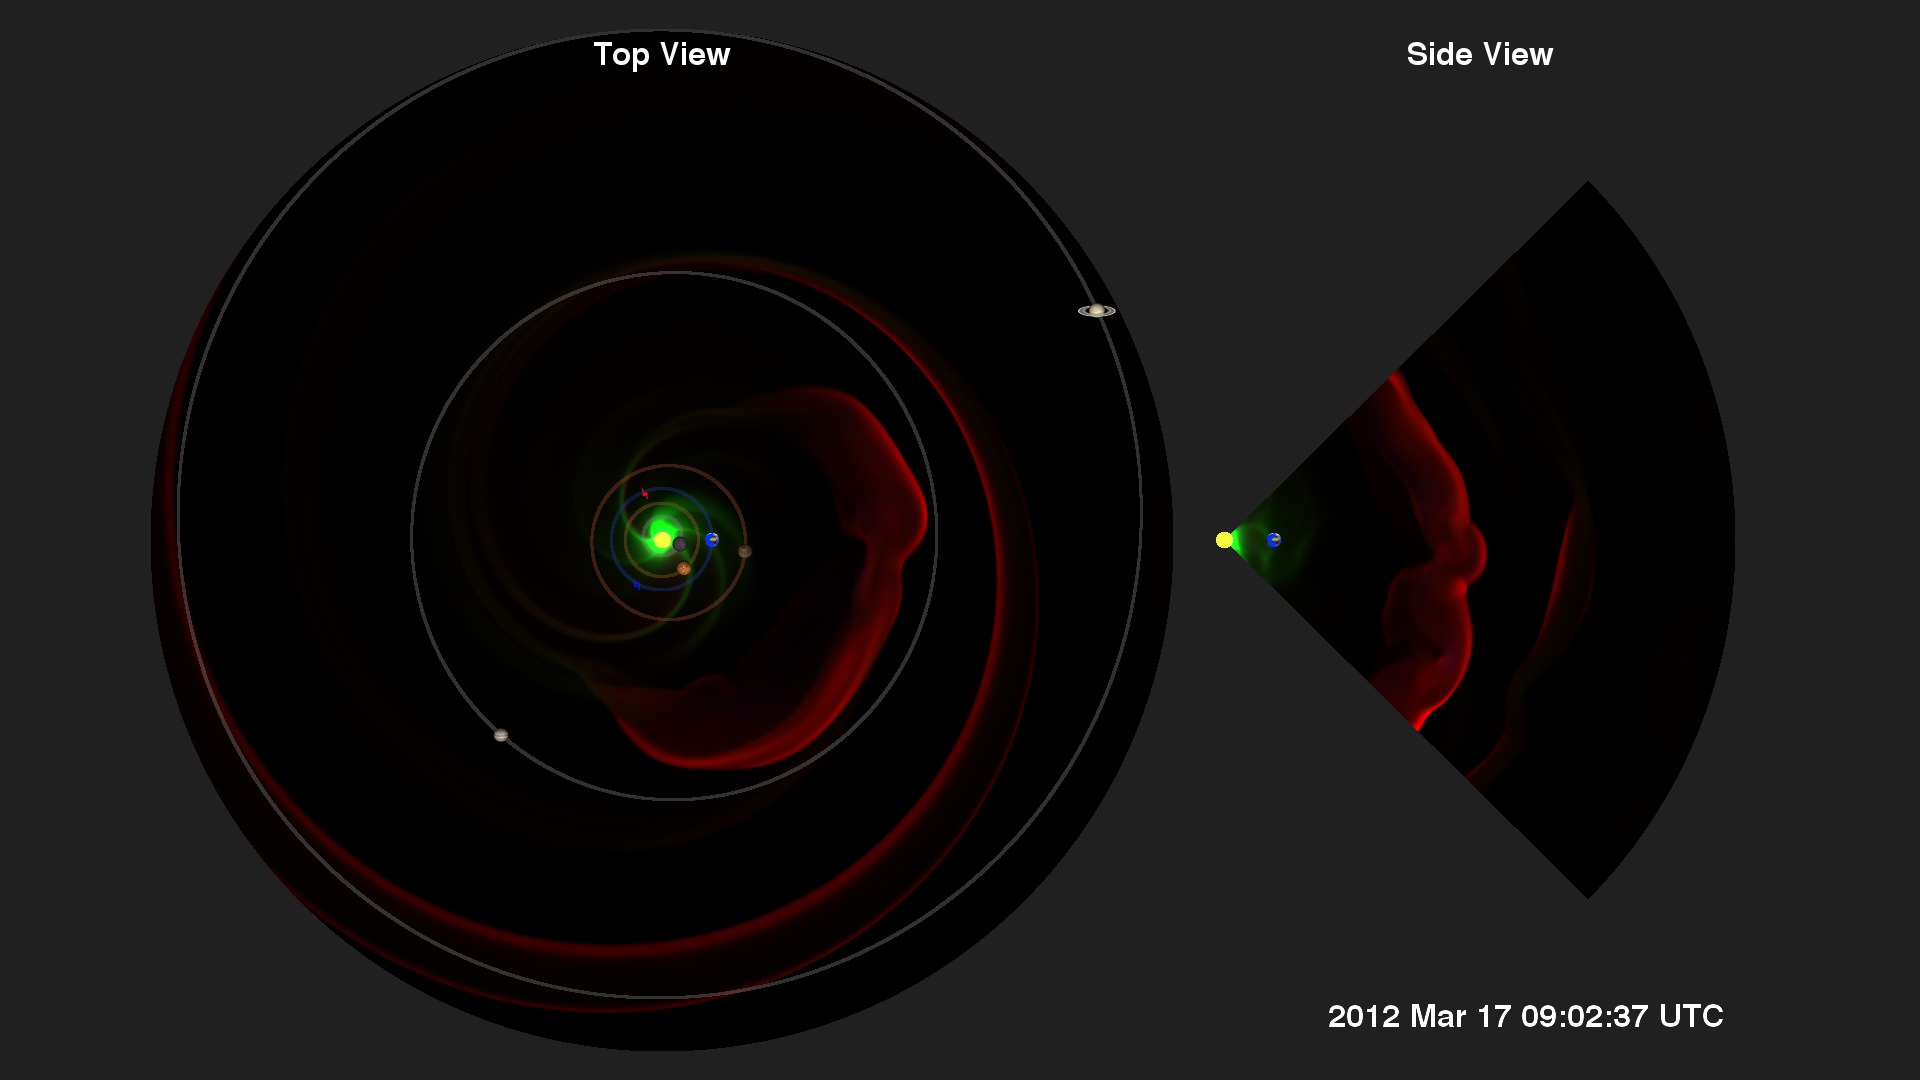 Enlil model for the March 2012 coronal mass ejection, plotted out to ten astronomical units (beyond the orbit of Saturn).  The top view slices the data in the plane of the Earth's orbit and projects the planetary orbits onto that.  The side view is a cross-section through the Sun-Earth line.  The wedge-shape of the side view is because the Enlil model only extends above and below the solar equator by 60 degrees.